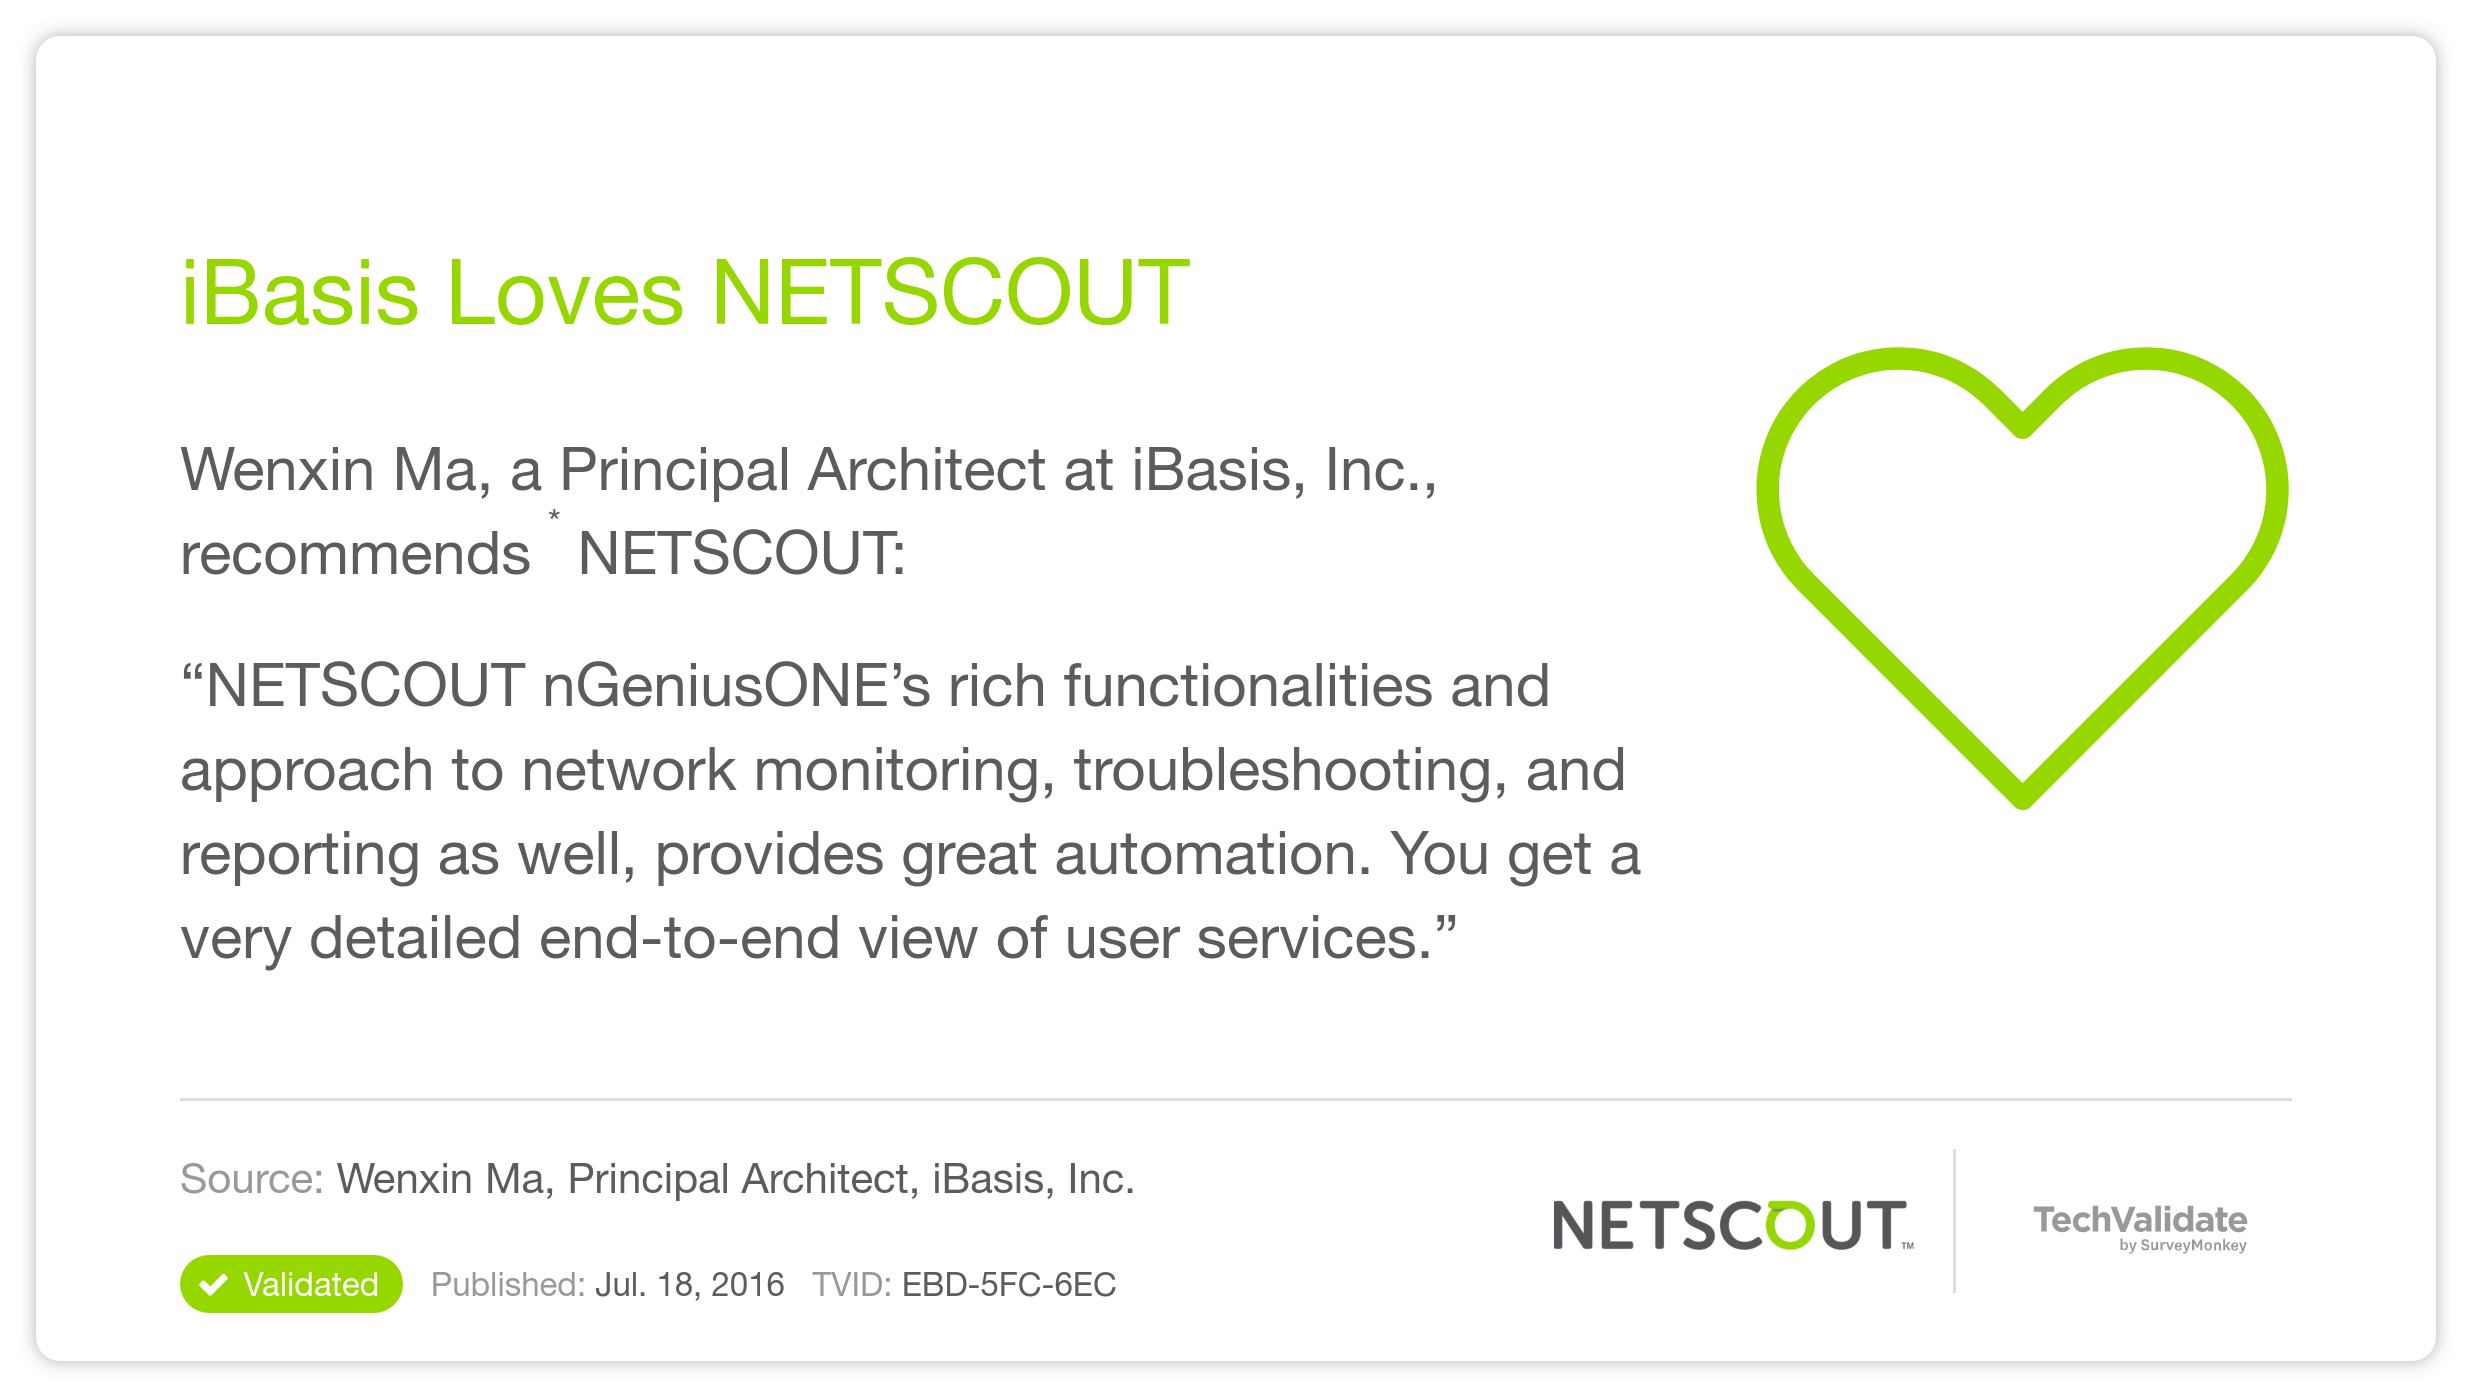 iBasis Loves NETSCOUT